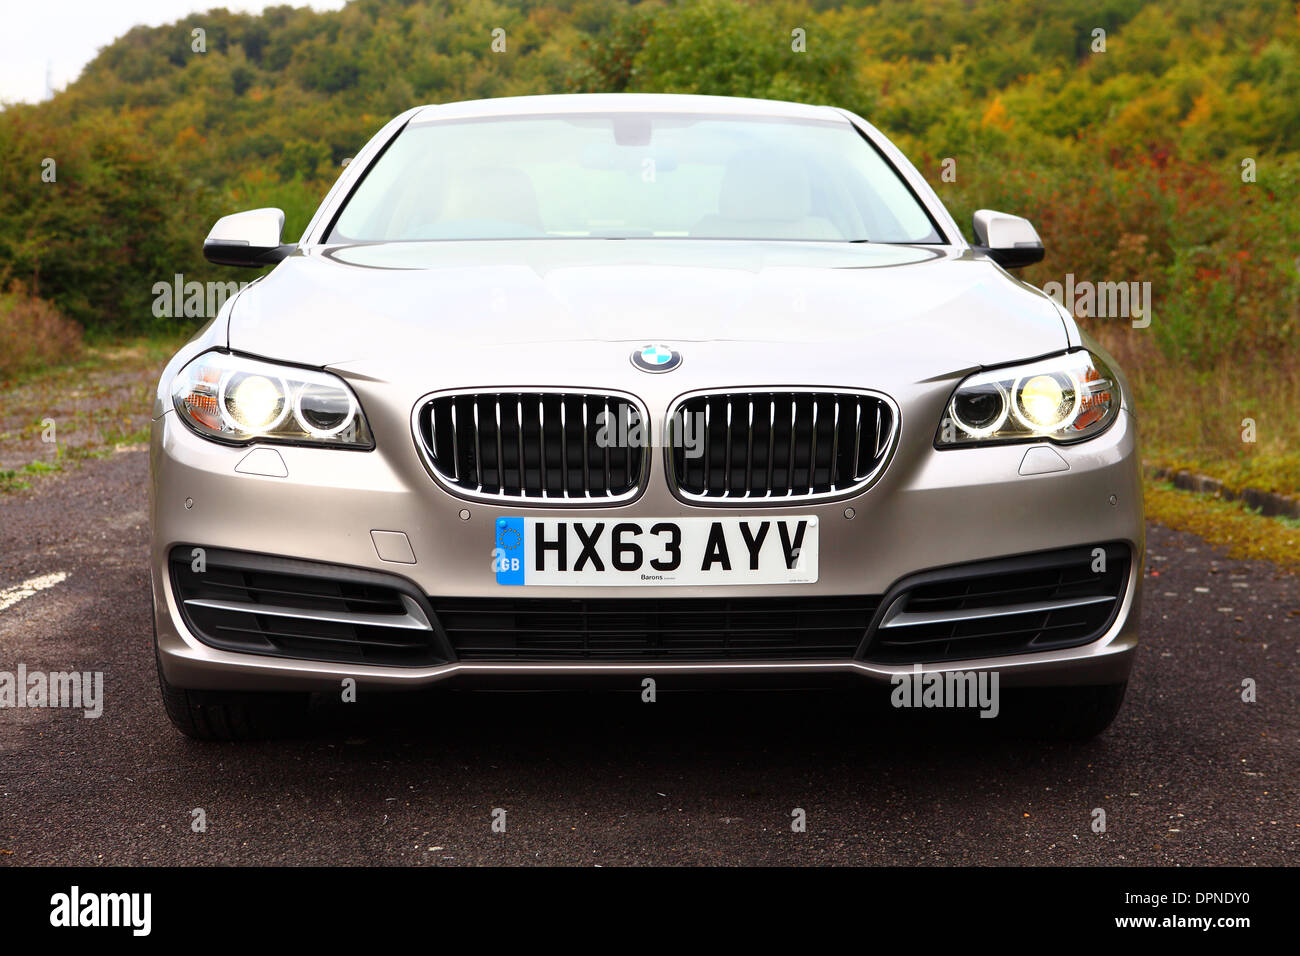 BMW 5-Series Saloon Car in Cashmere Silver F11 2013 Facelift Version Stock Photo